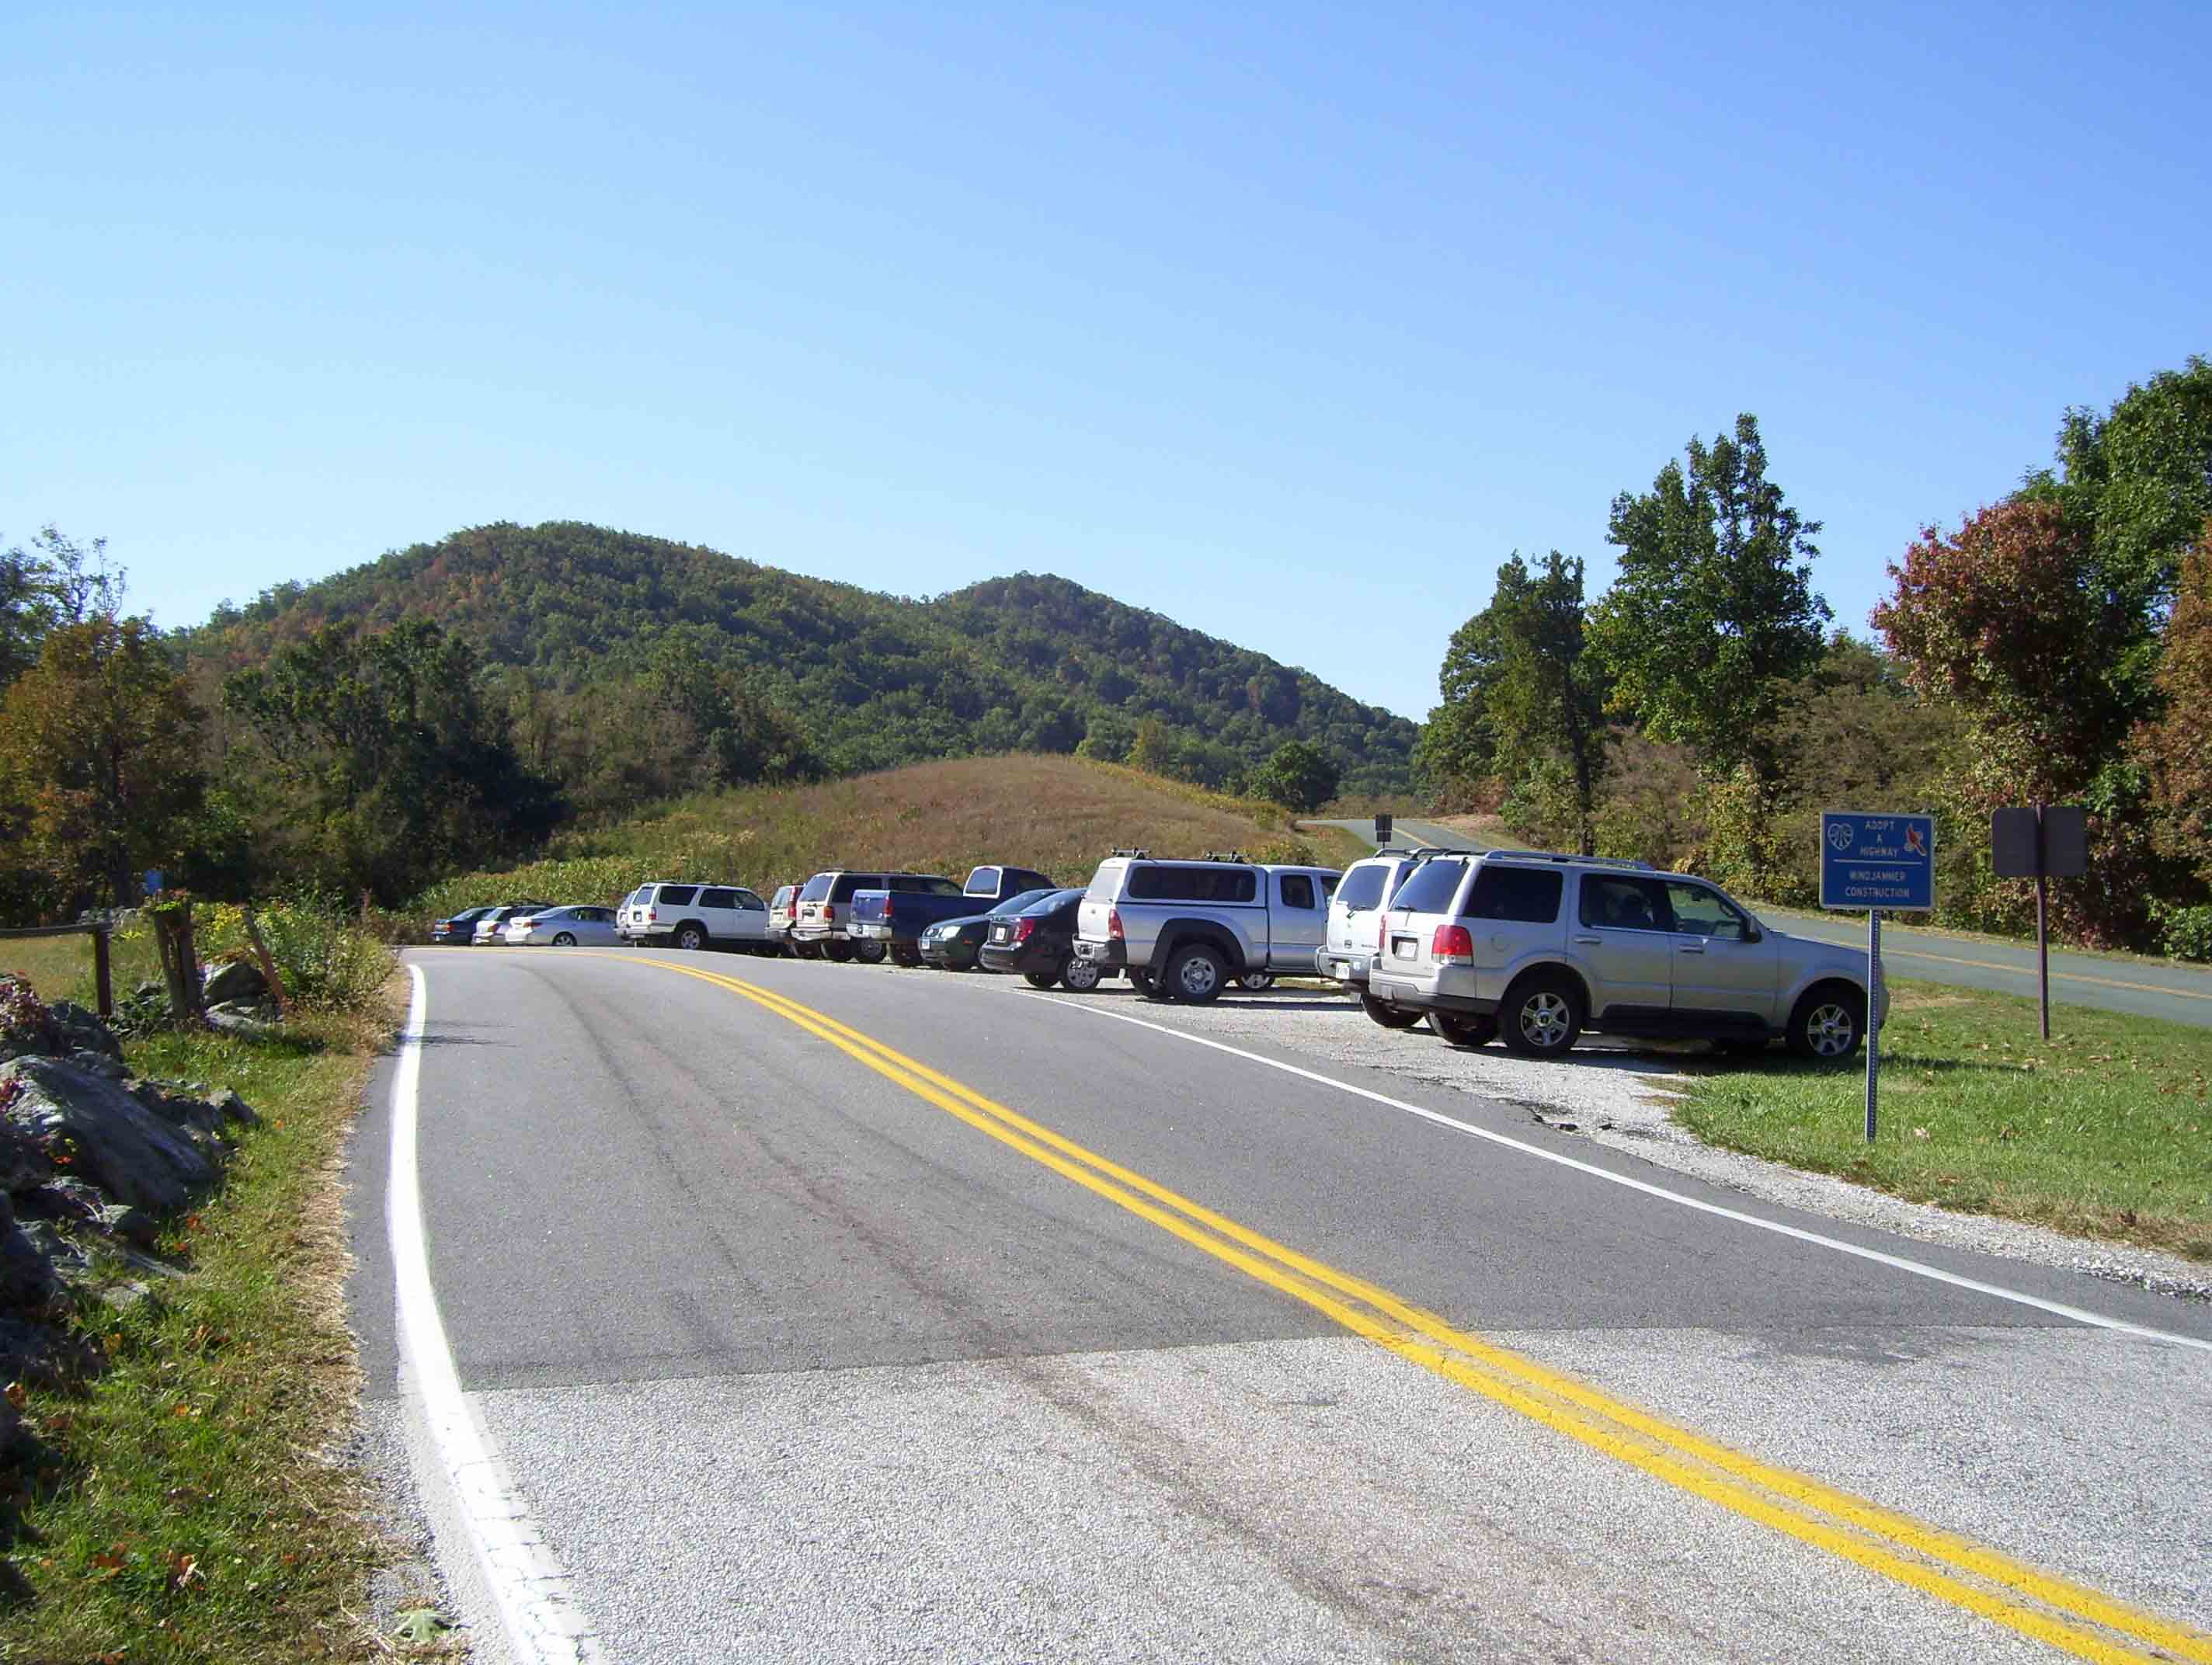 mm 0.0 - Parking area along VA 664 in Reeds Gap. The road on the right is the Blue Ridge Parkway.  Courtesy dlcul@conncoll.edu